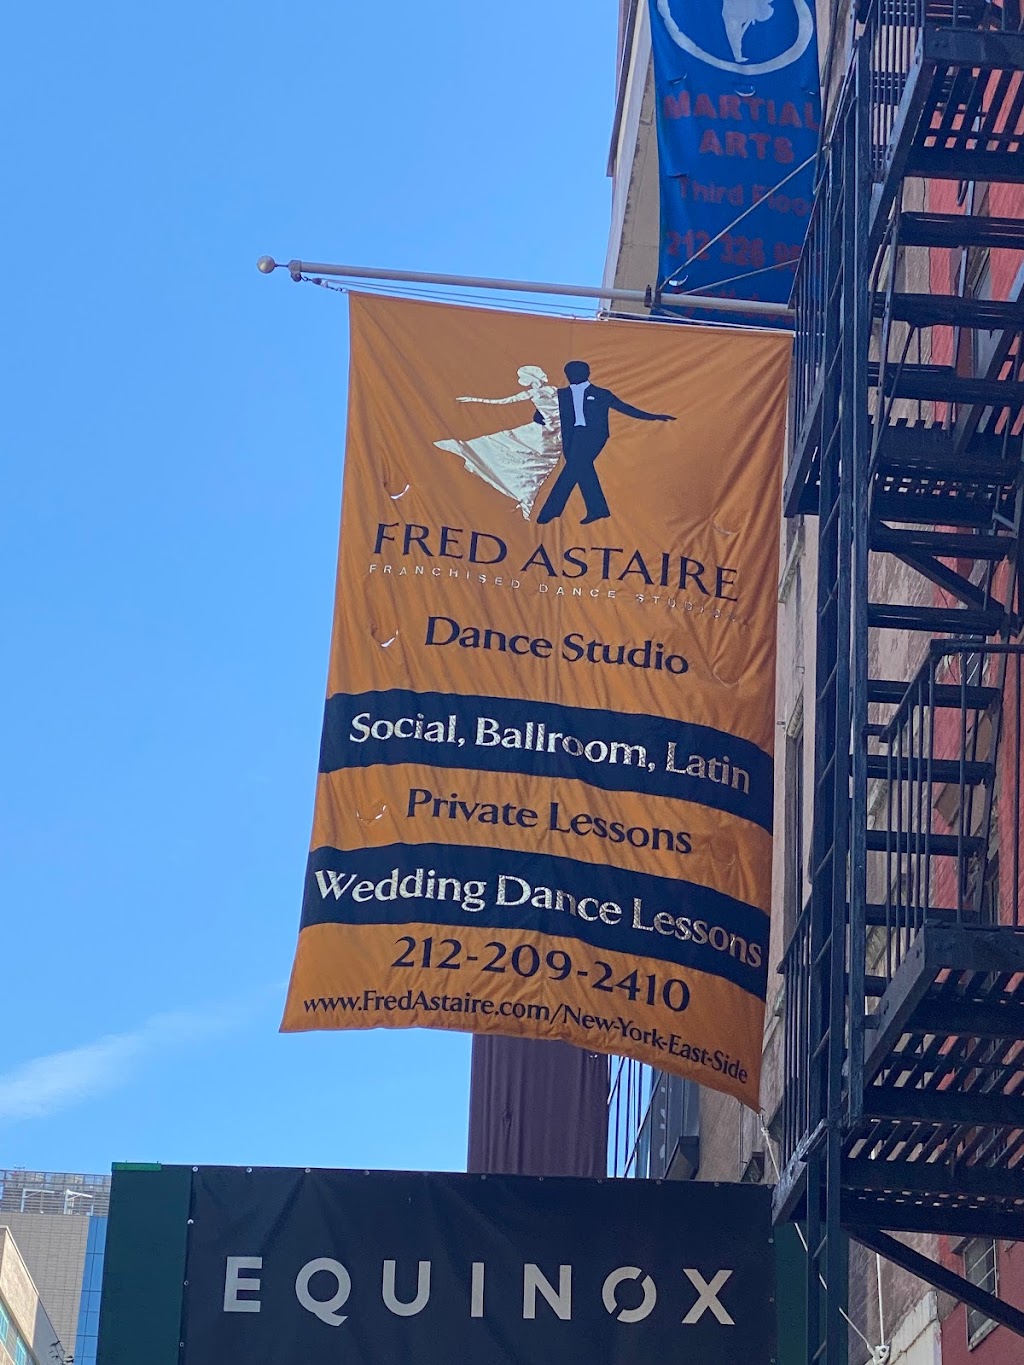 Fred Astaire Dance Studio New York East Side | 328 E 61st St, New York, NY 10065 | Phone: (212) 209-2410